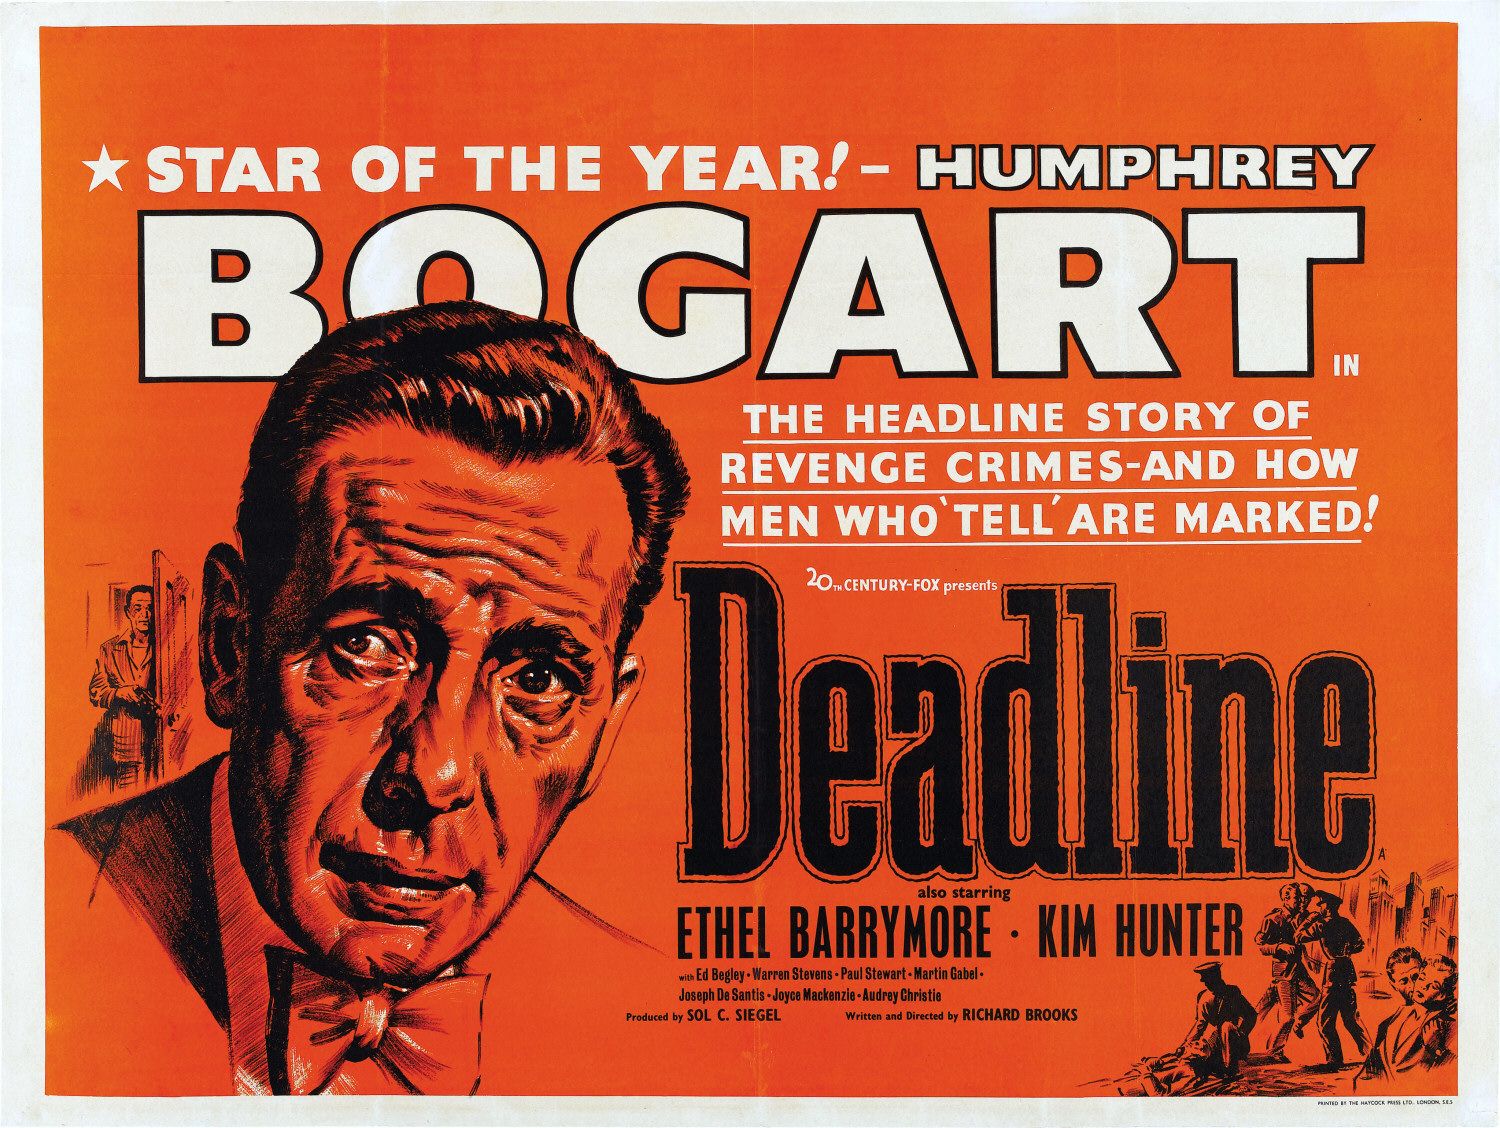 Humphrey Bogart plays a crusading editor intent on exposing crooked politicians in "Deadline U.S.A." The 1952 classic opens this year Black and White Film Festival Friday, Sept. 5.